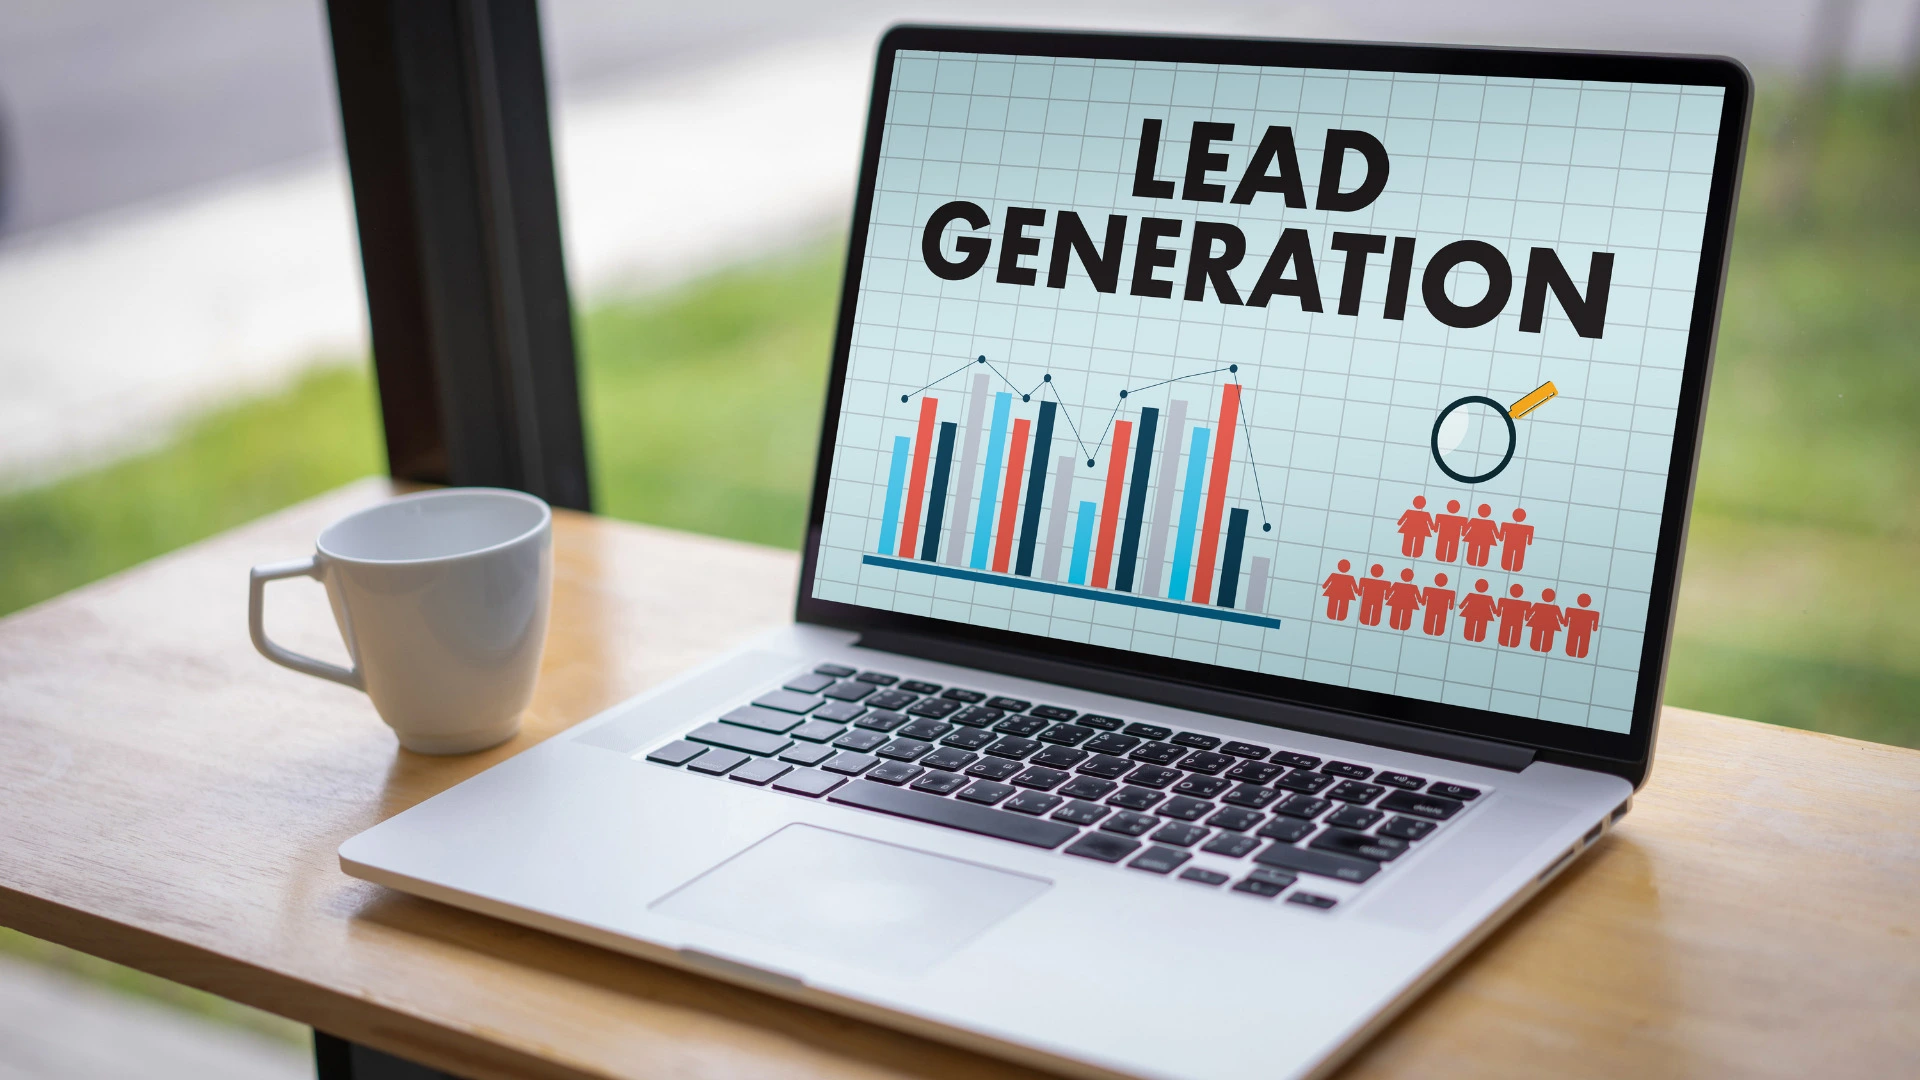 Lead Generation For Small Business In Denver